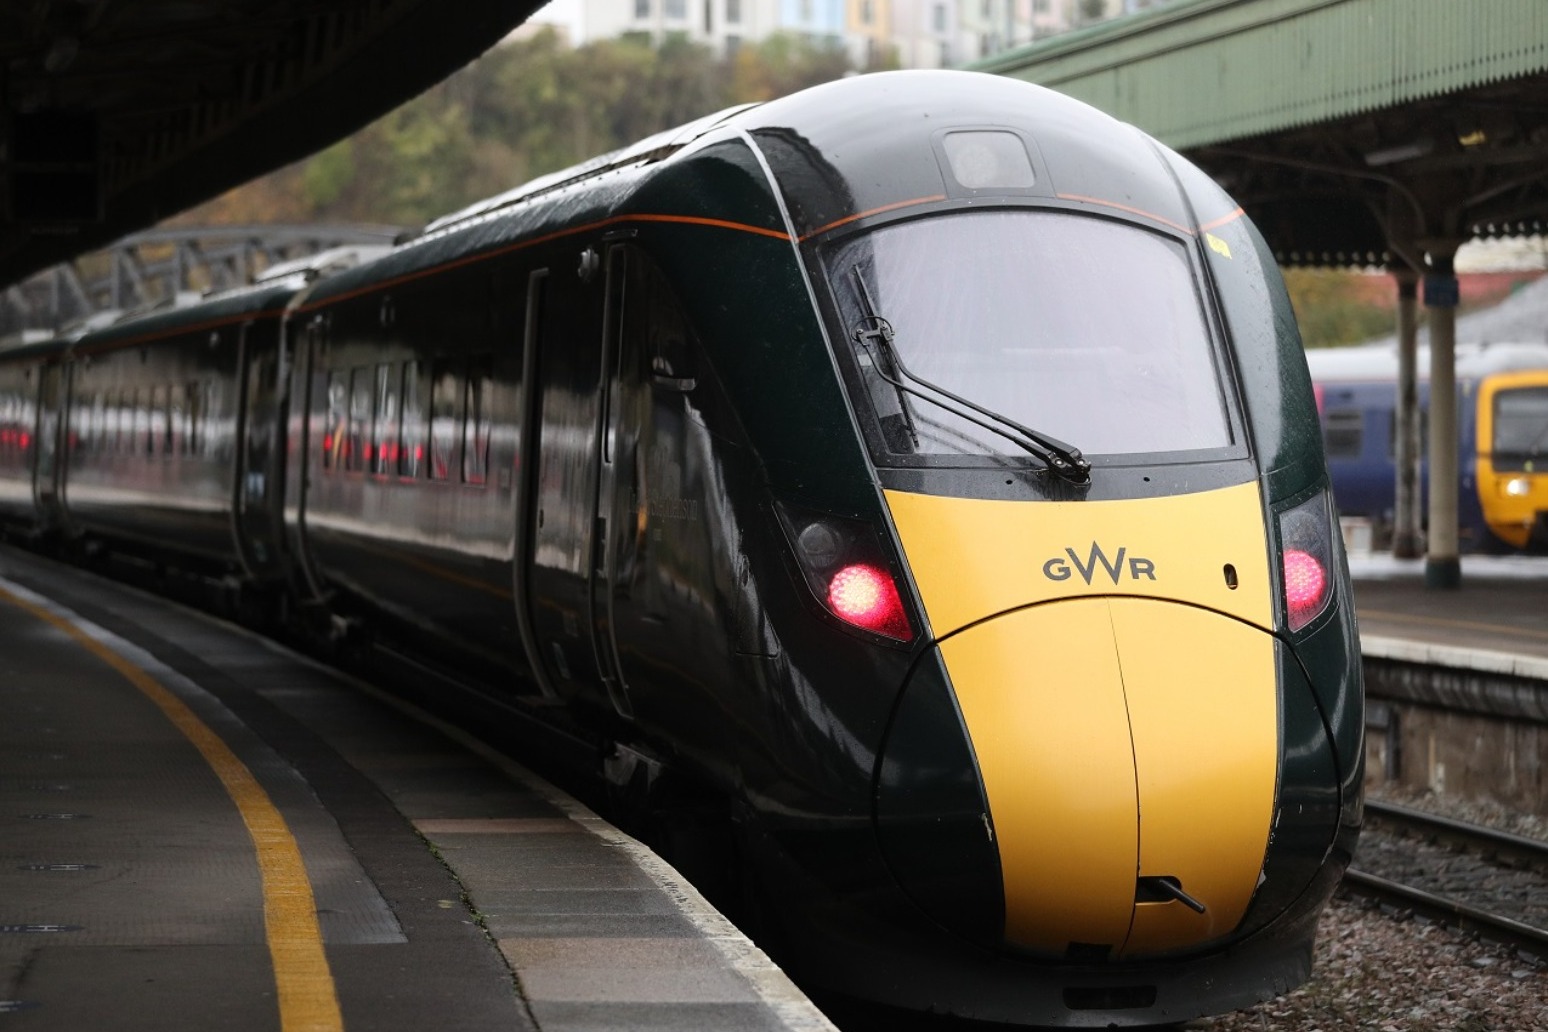 Sweeping reforms to overhaul Britain’s ‘complicated’ rail system 